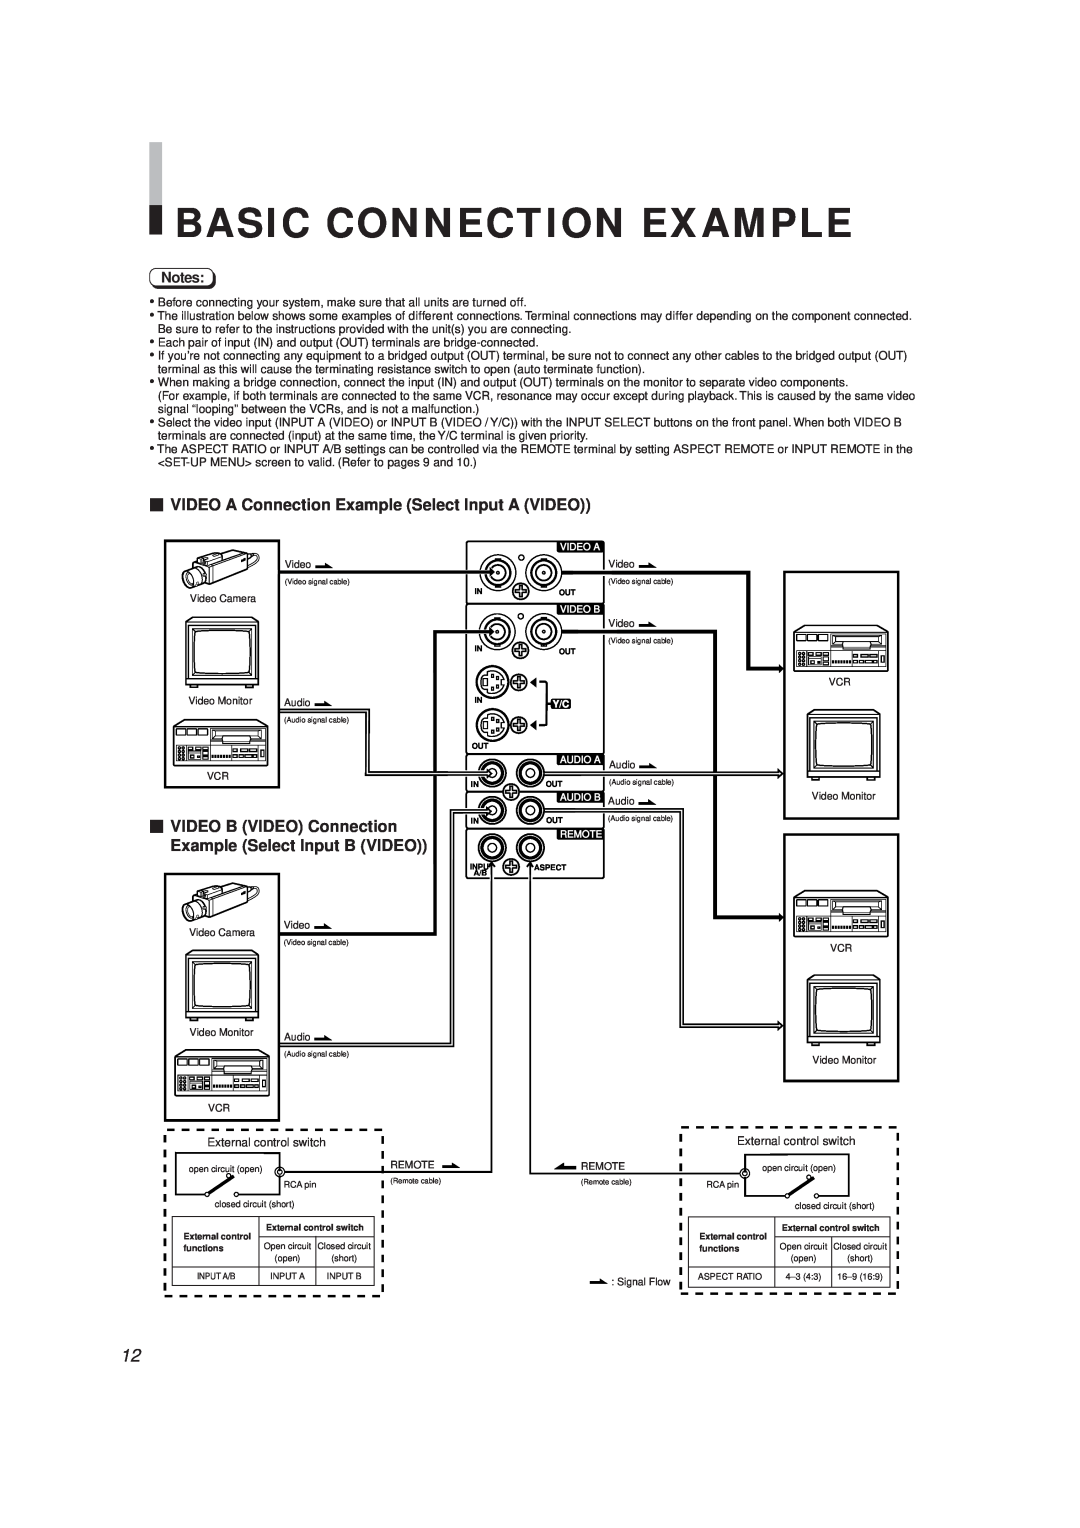 JVC TM-H1375SU manual Basic Connection Example, VIDEO A Connection Example Select Input A VIDEO 